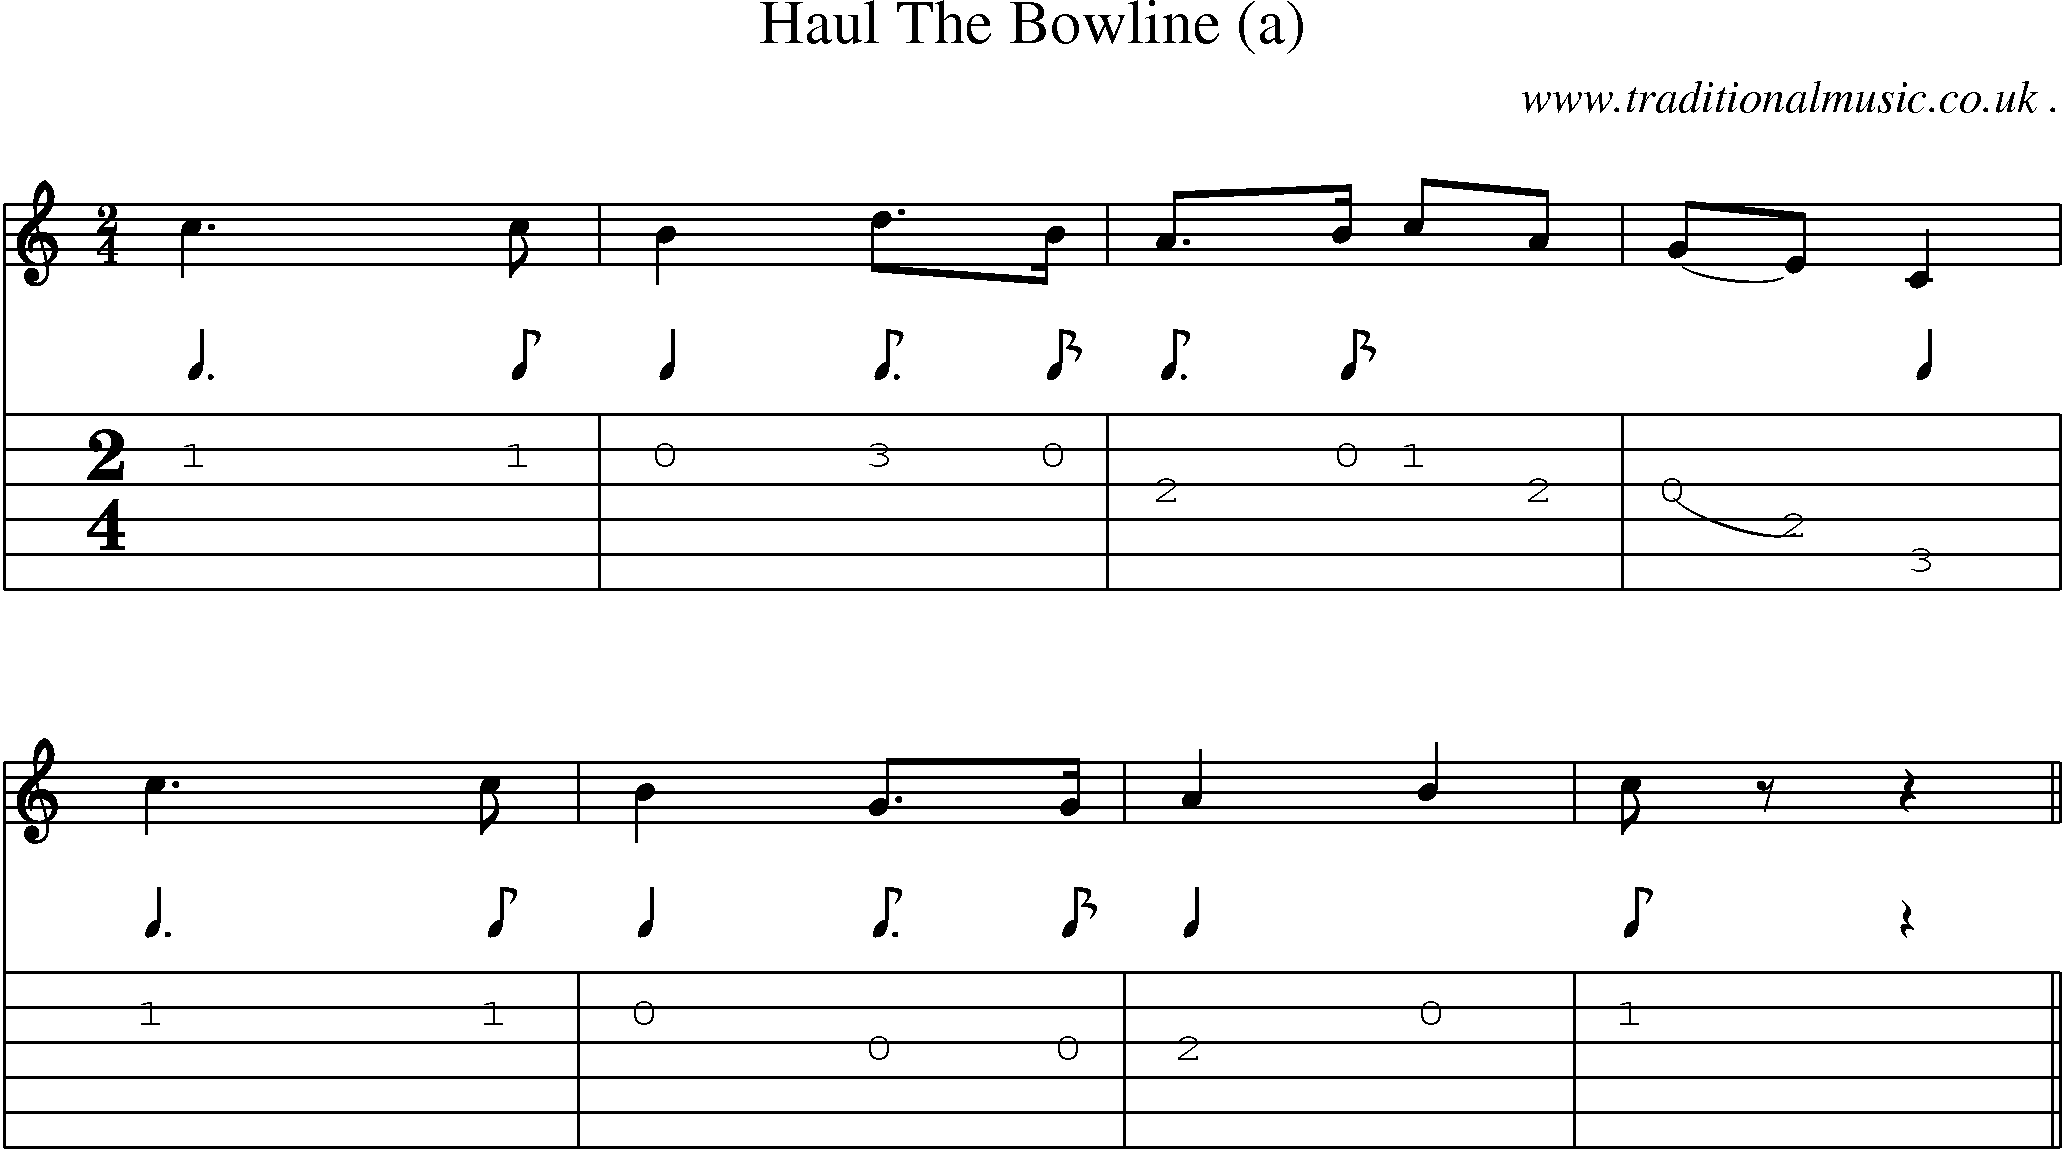 Sheet-Music and Guitar Tabs for Haul The Bowline (a)